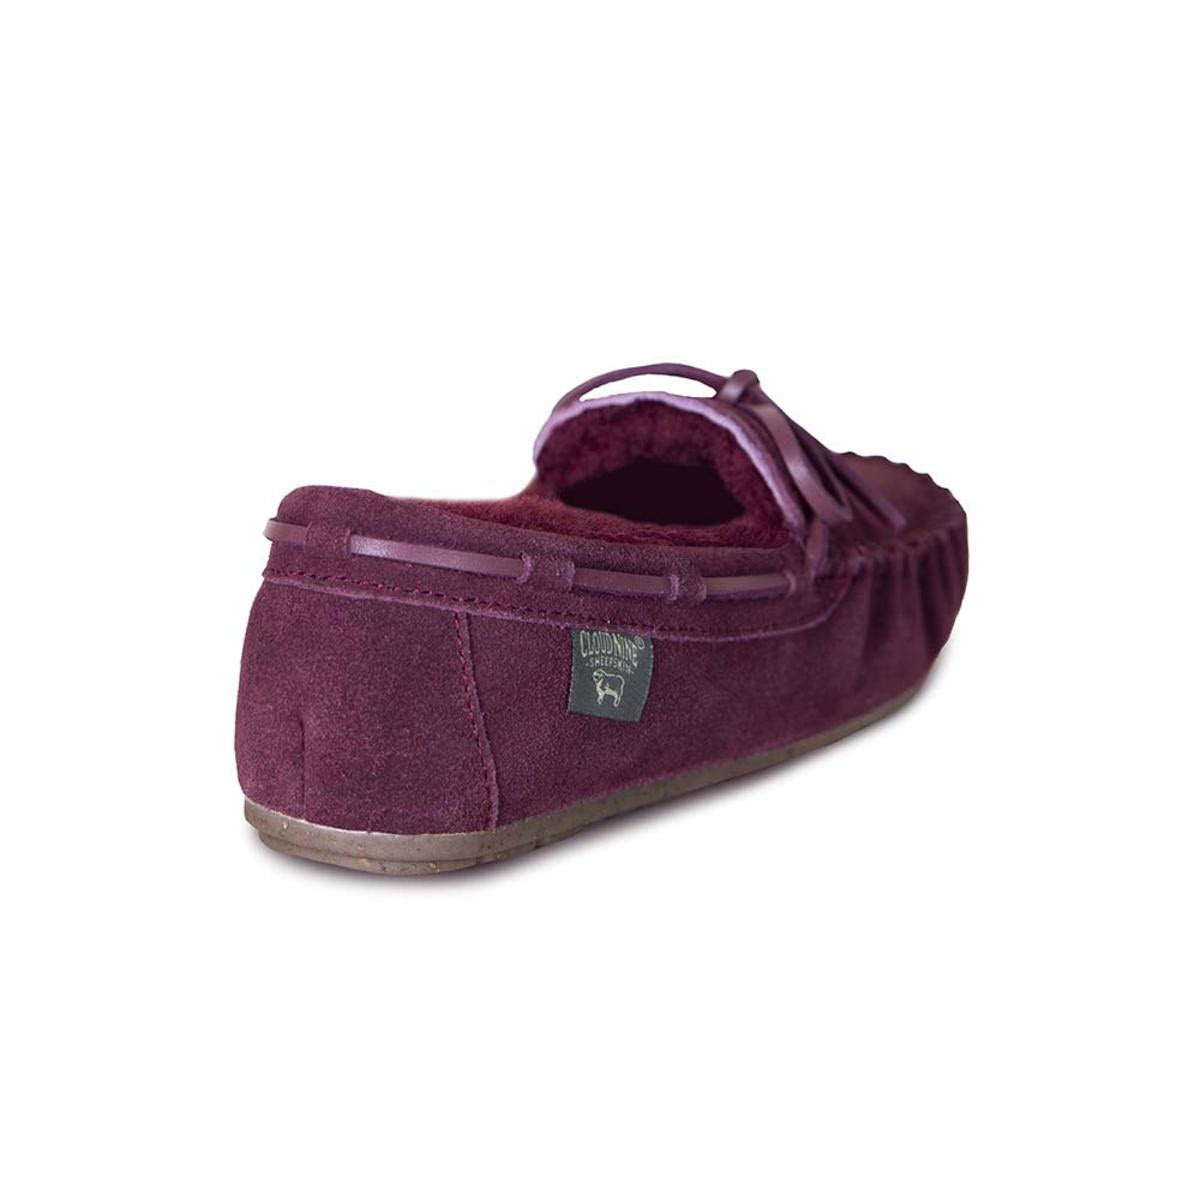 A single Cloud Nine Ladies Moc 2 Burgundy slipper with an adjustable strap isolated on a white background.